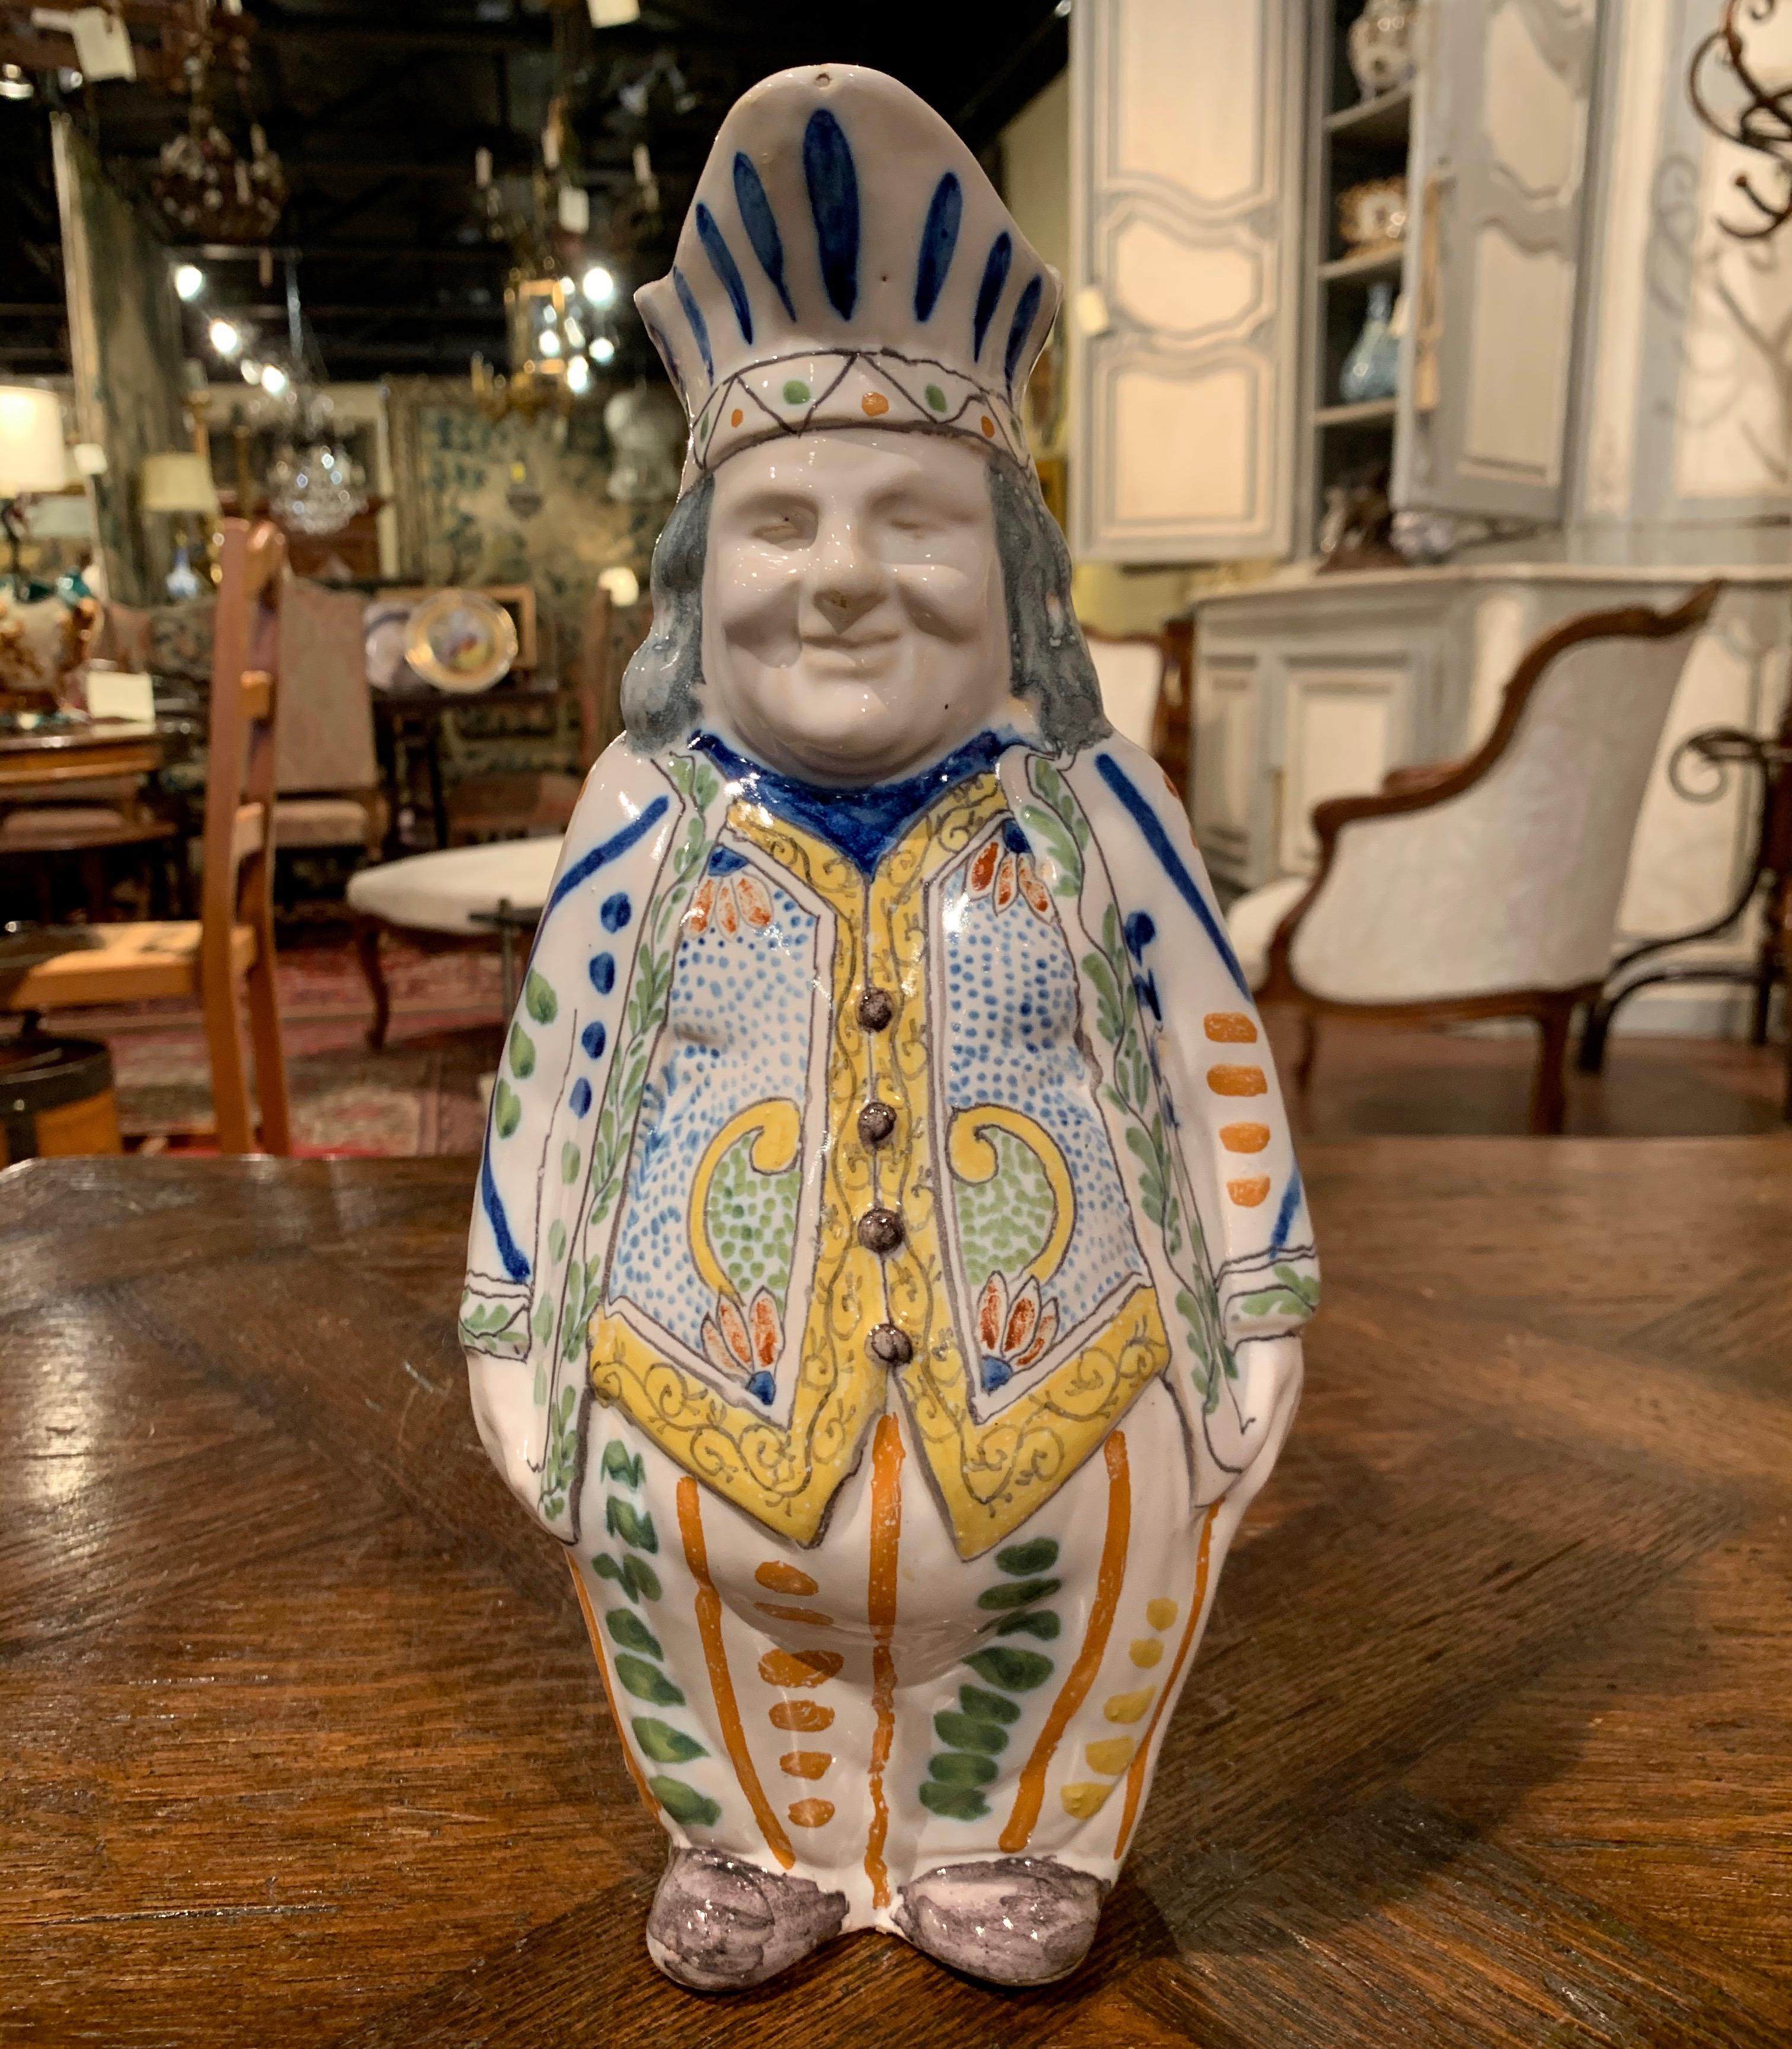 Decorate a wet bar or a shelf with this charming antique Majolica pitcher, crafted in central France (probably in Malicorne) circa 1880, the colorful pitcher features a smiling man's sculpture dressed in tuxedo and toque. The sculptural carved